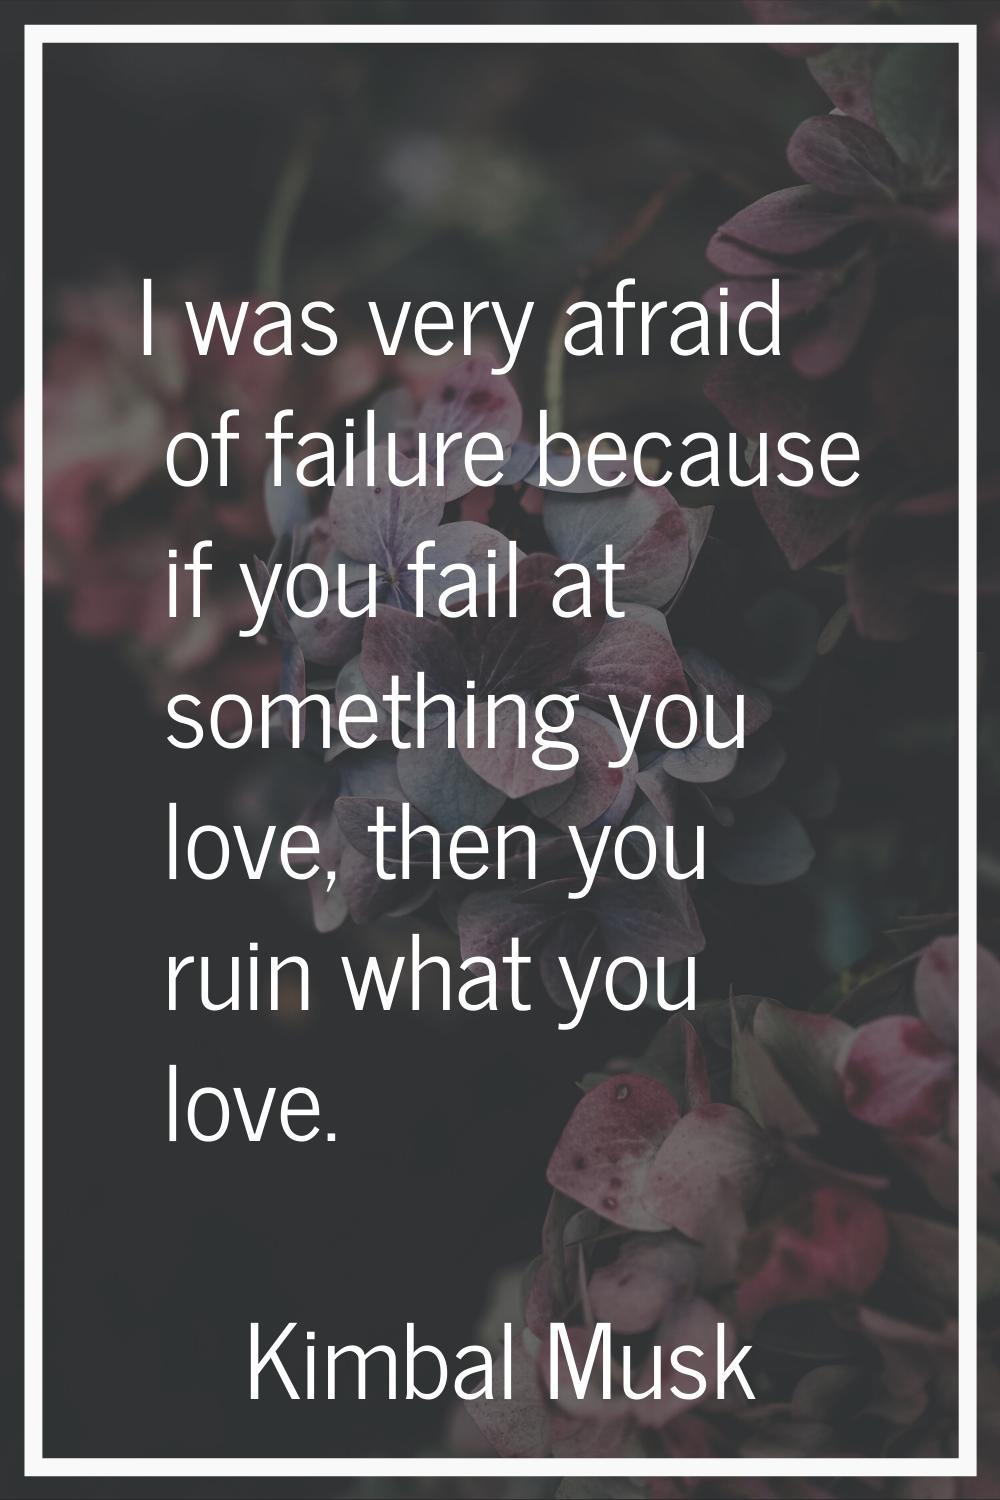 I was very afraid of failure because if you fail at something you love, then you ruin what you love